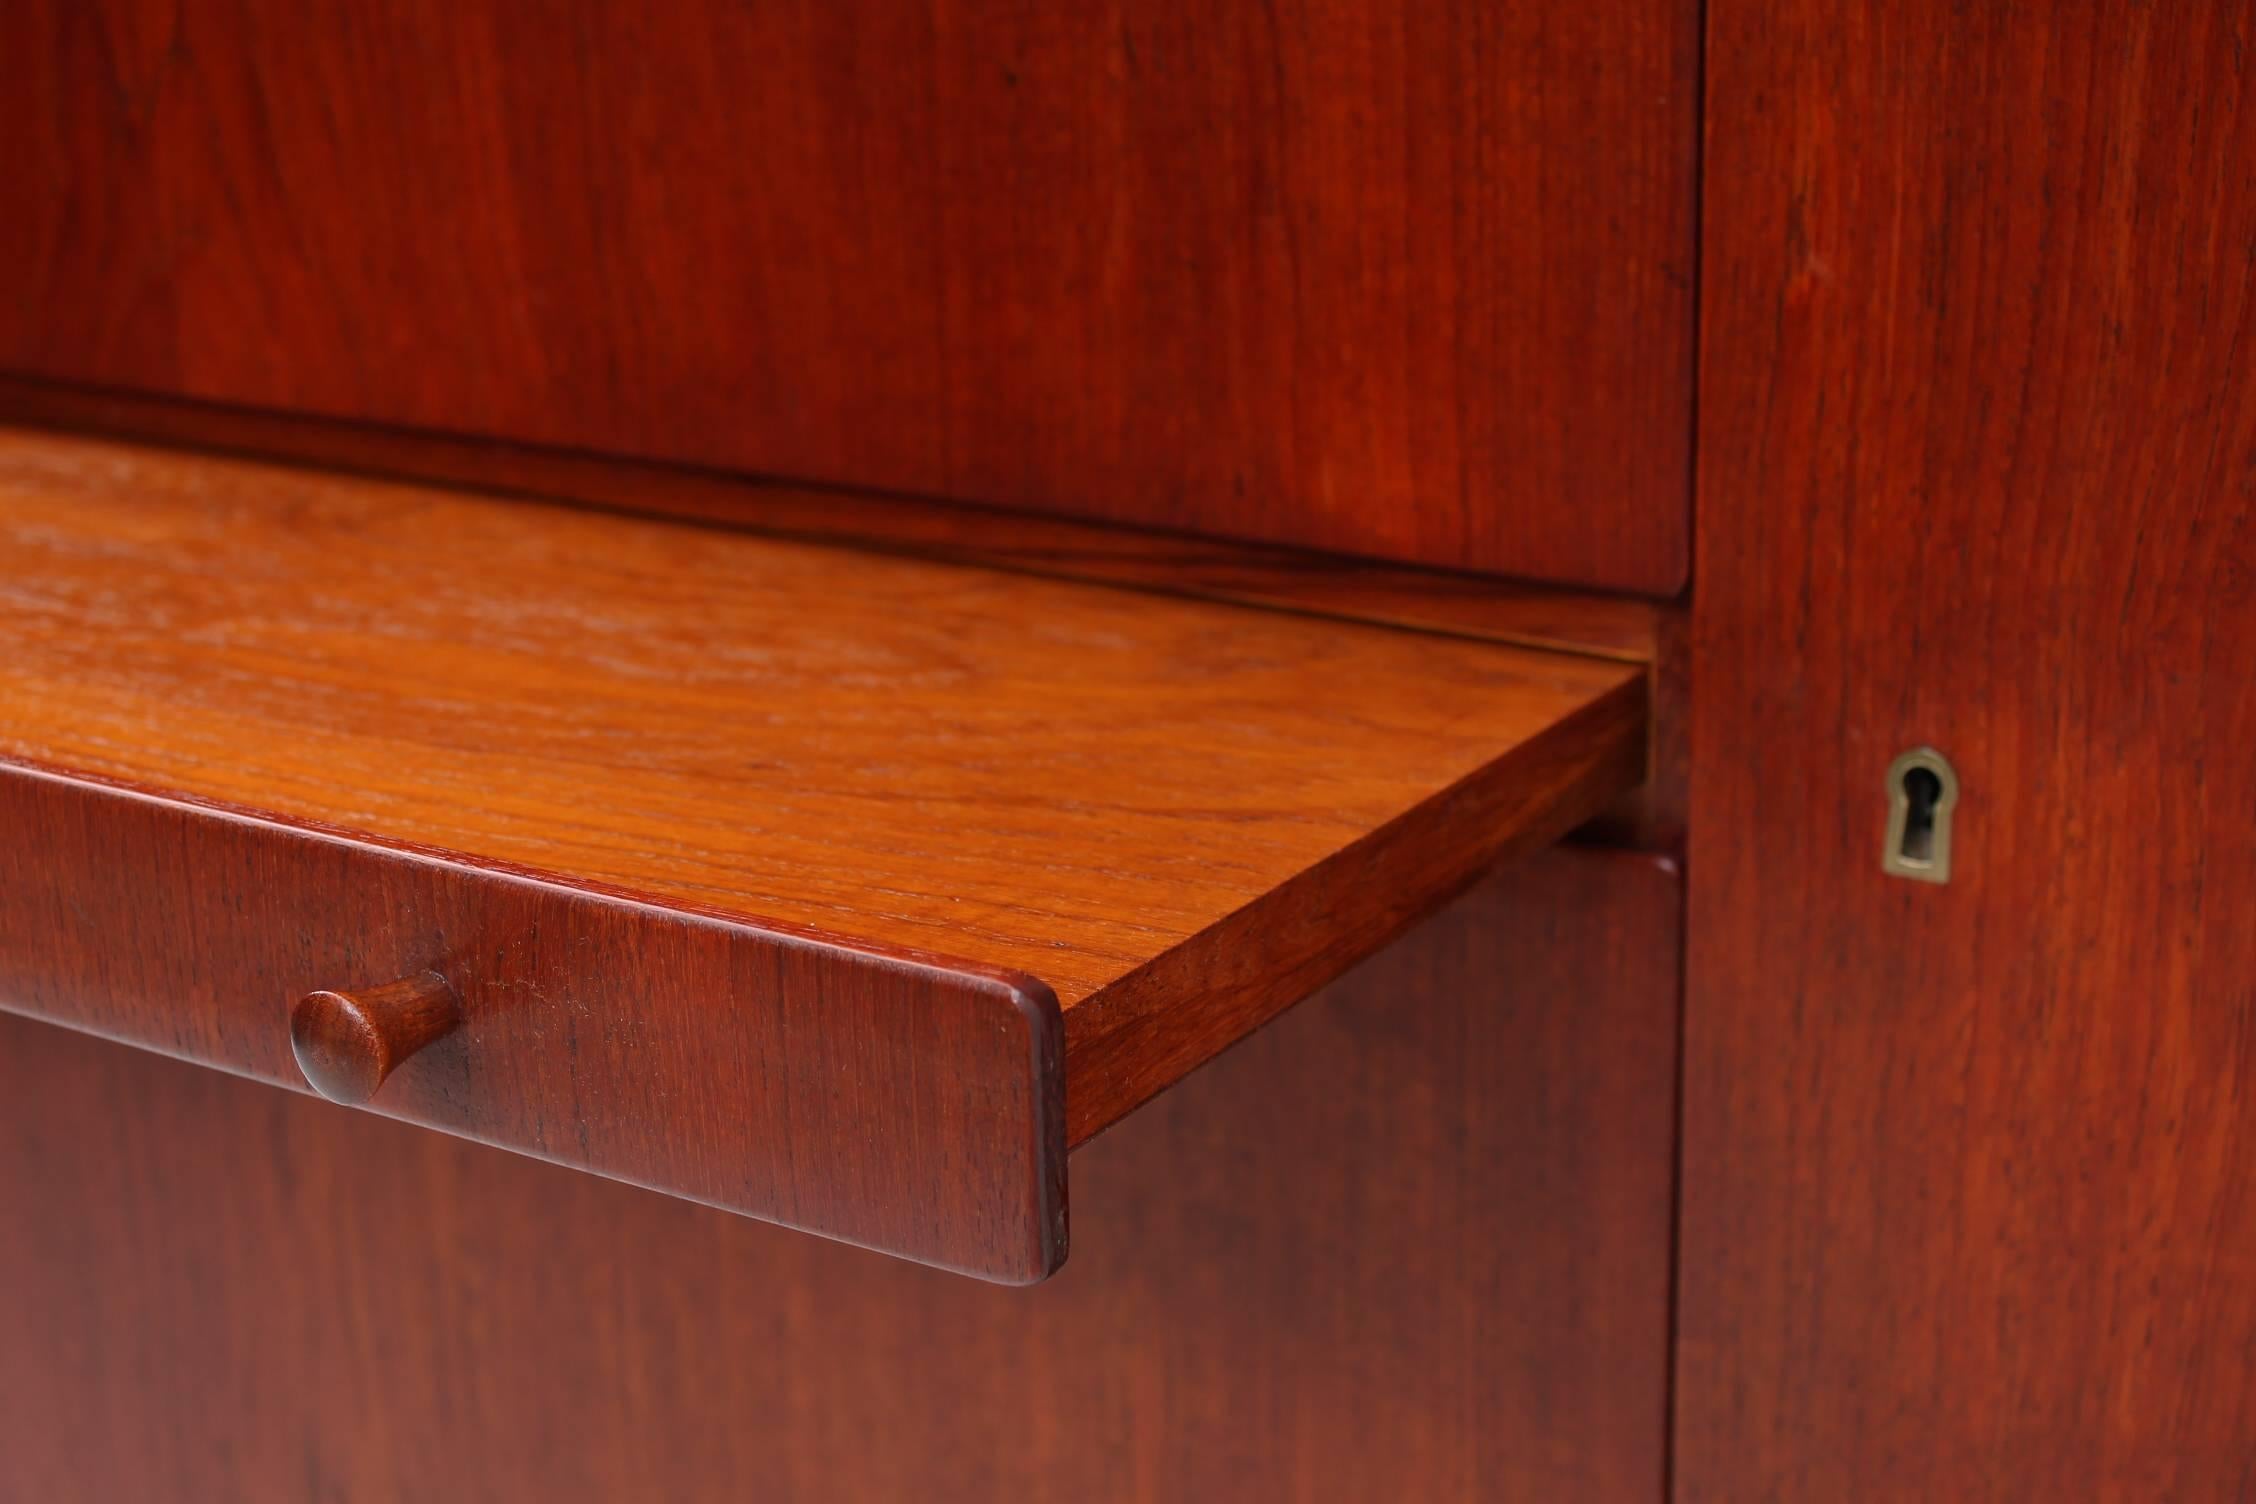 Rare Teak and Beech Cabinet/Wardrobe by Finn Juhl for Bovirke, 1950s In Excellent Condition For Sale In Houston, TX